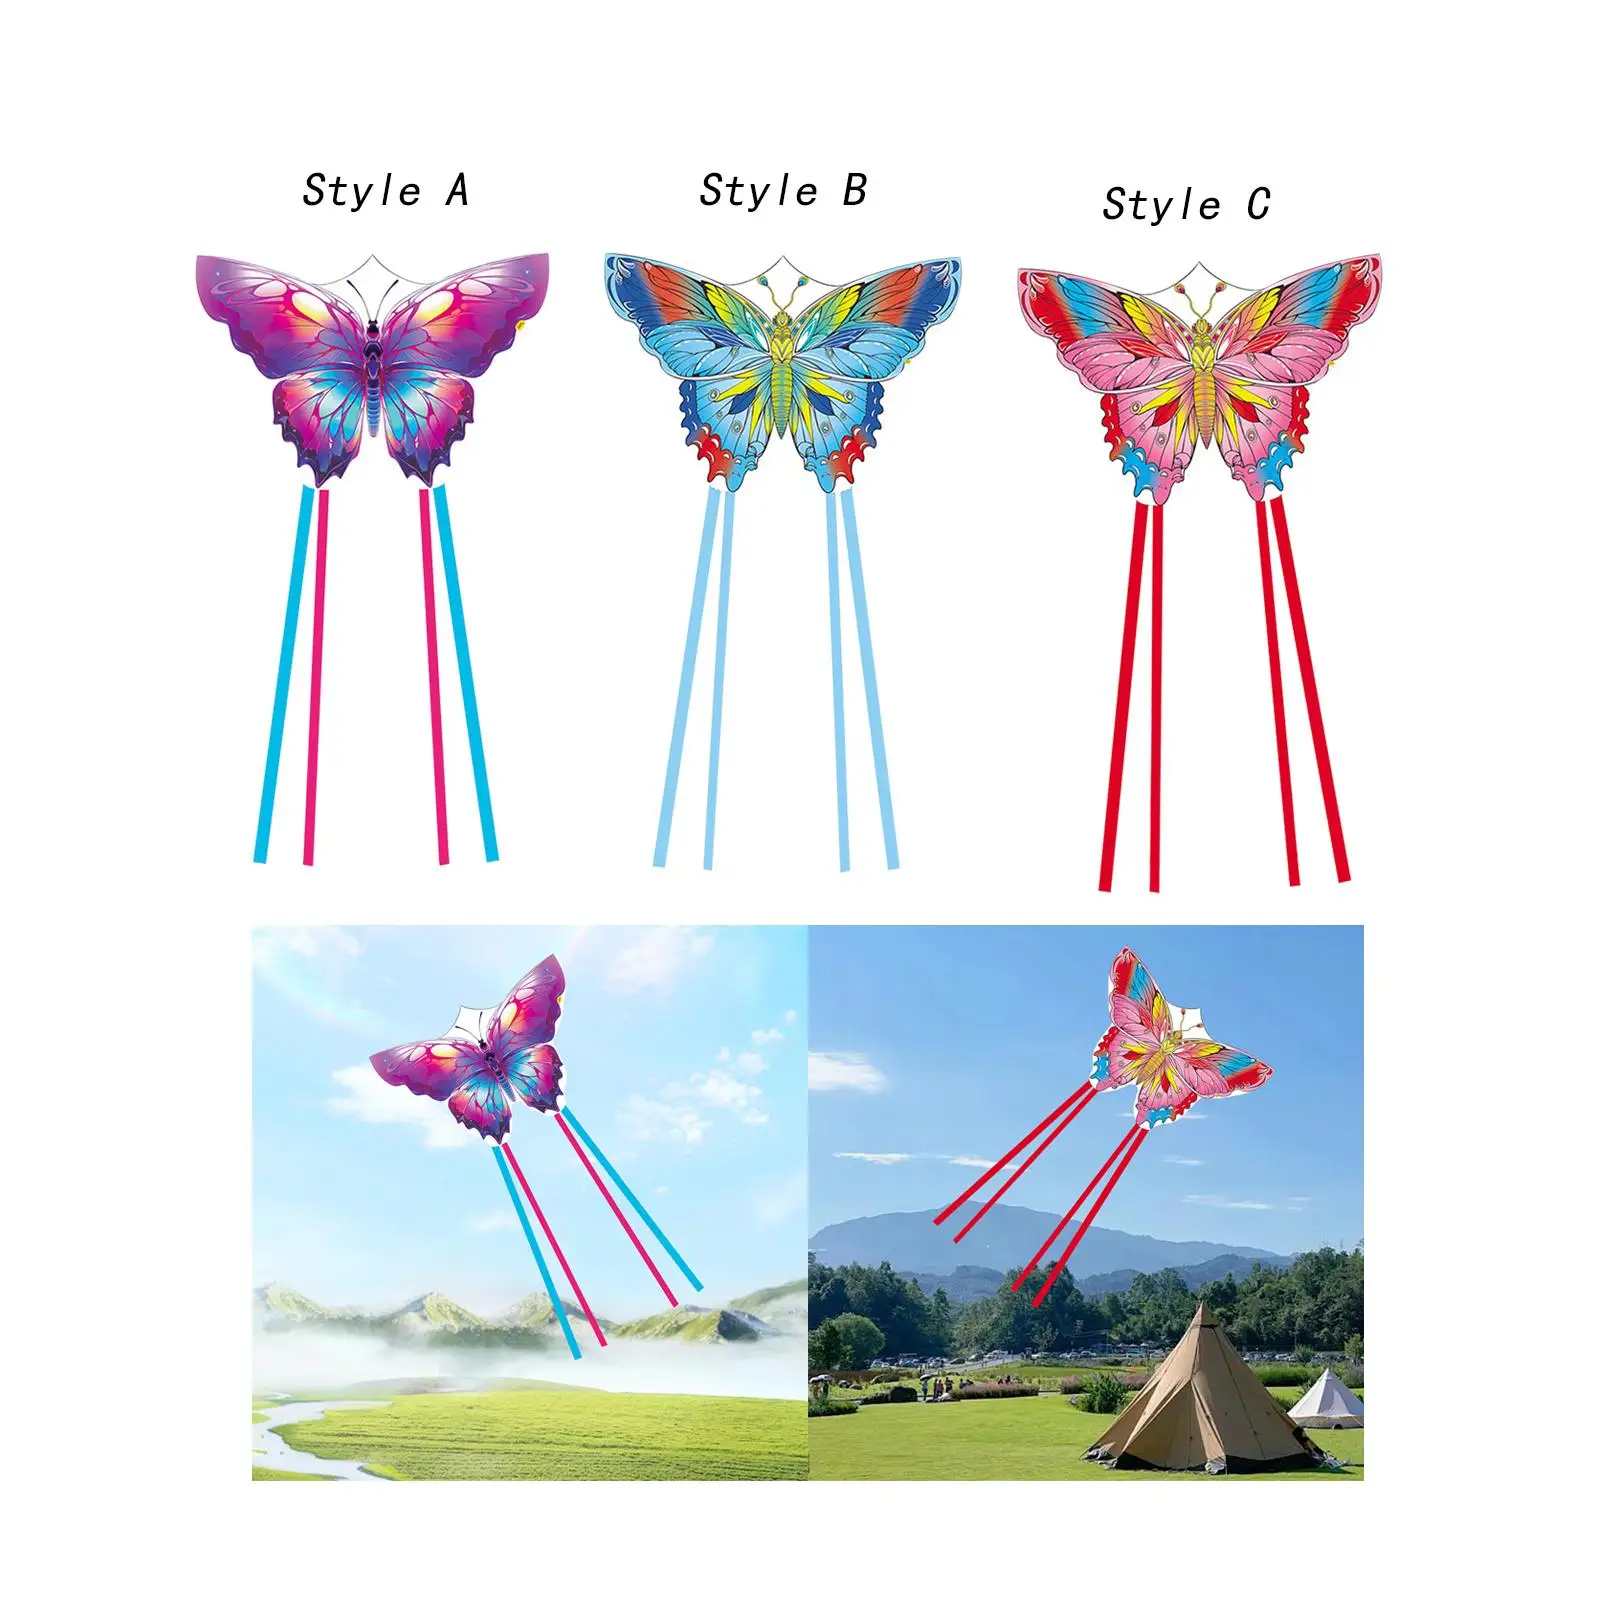 Huge Kite for Adults Kids Beautiful Durable Colorful Sports Kite Fabric Kites for Trip Birthday Gift Backyard Outdoor Game Farm